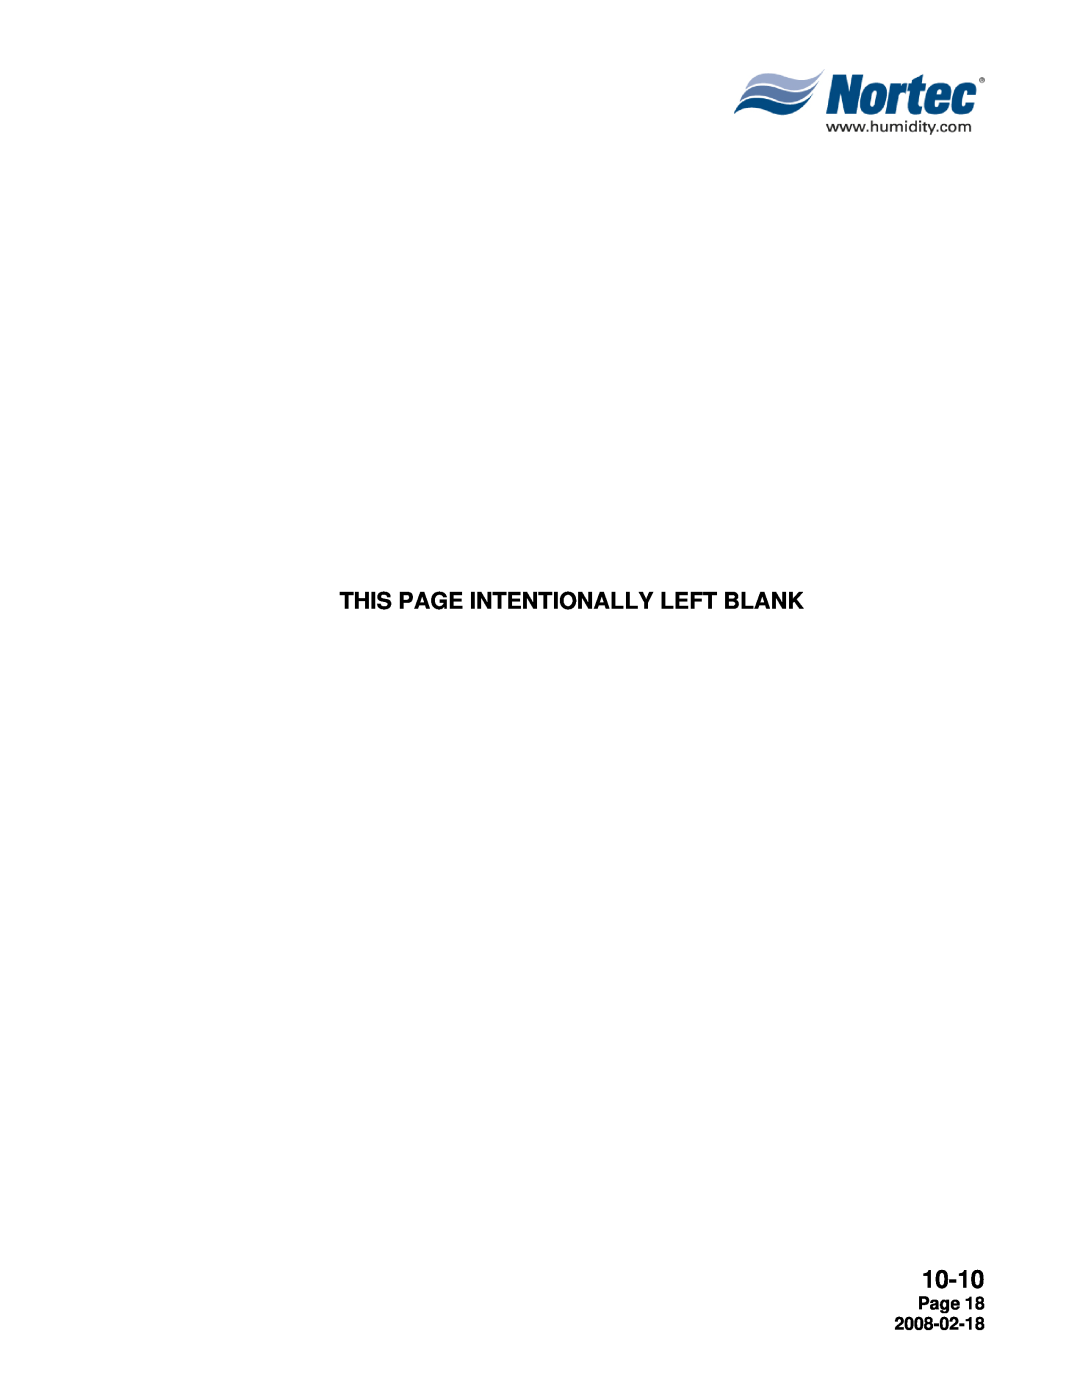 Nortec Industries NHTC Series installation manual This Page Intentionally Left Blank, 10-10 